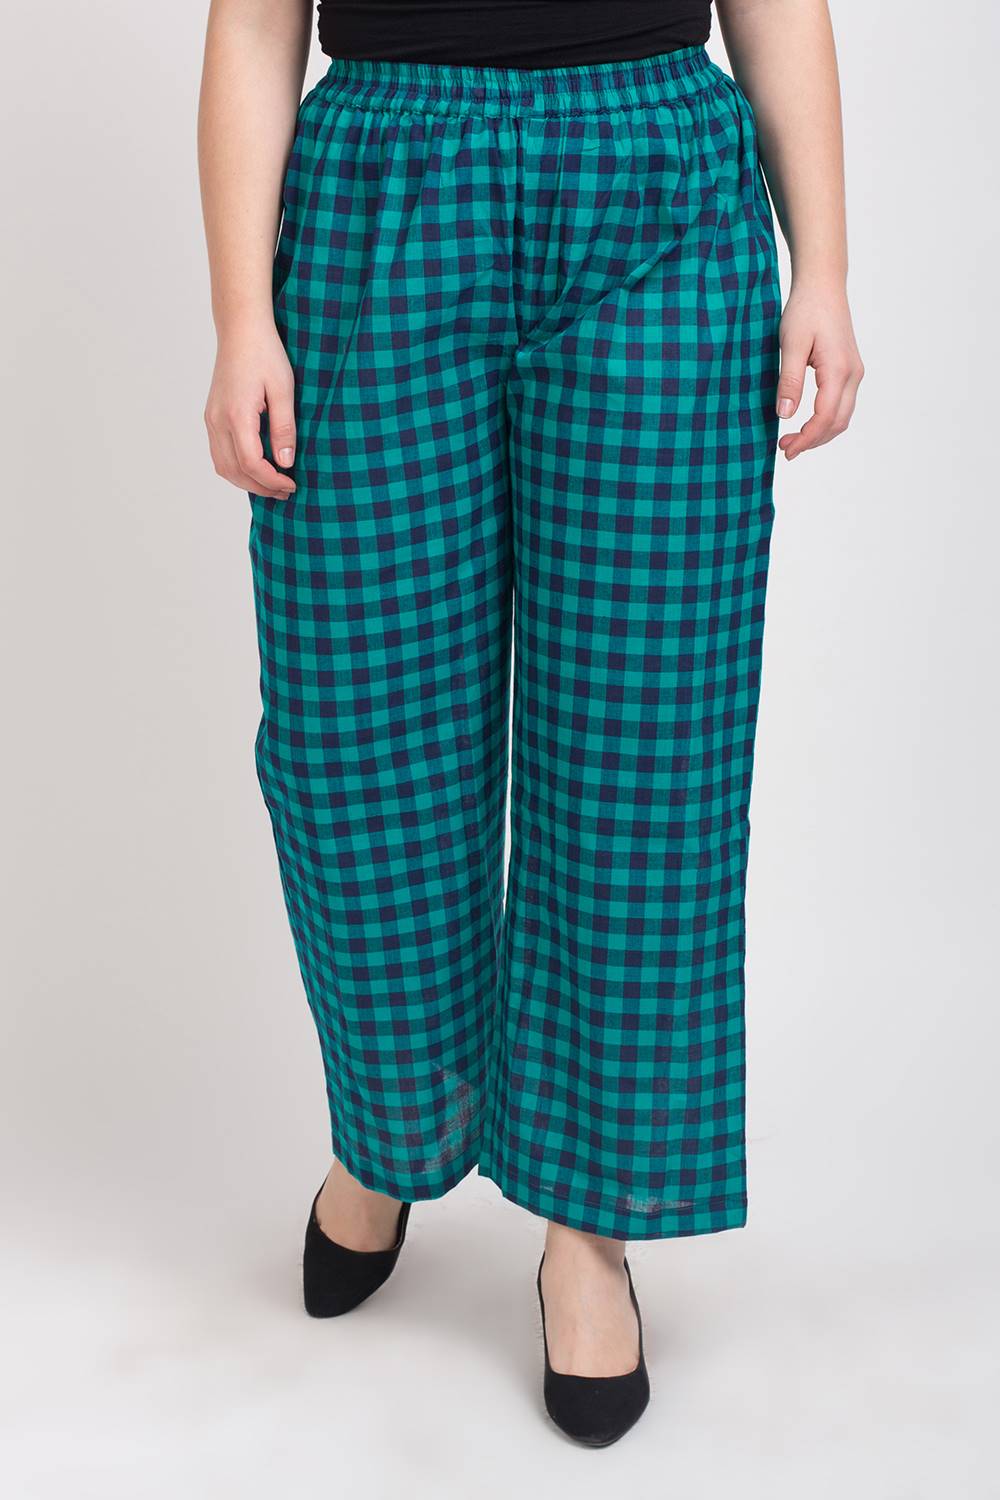 Cotton On Bottoms Pants and Trousers  Buy Cotton On Women Maroon Color  White Checkered Rachael Palazzo Pants Online  Nykaa Fashion